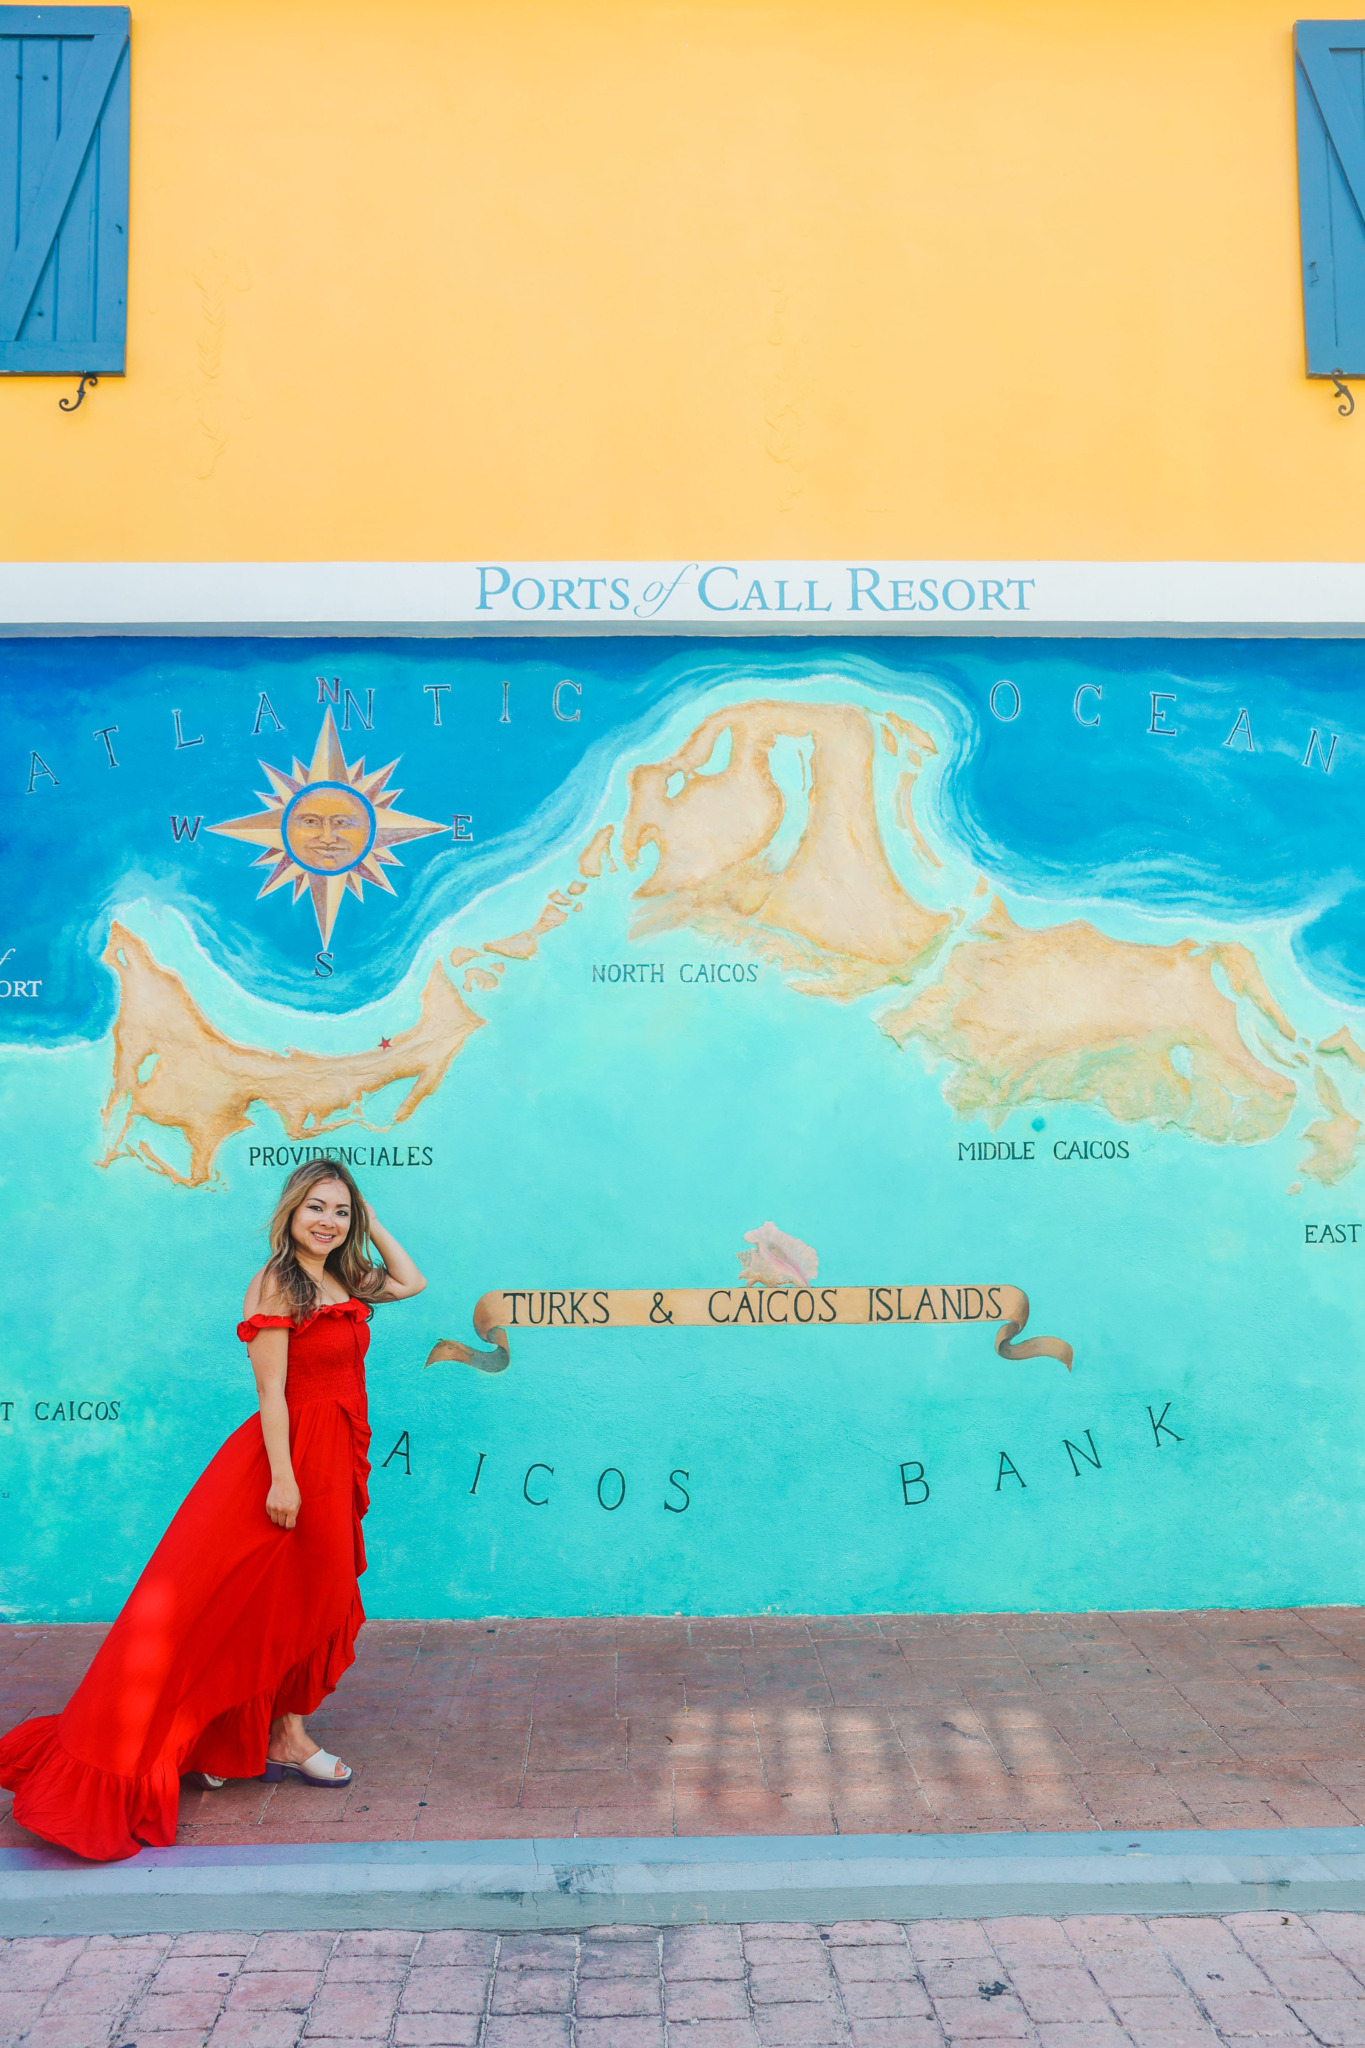 Turks and Caicos art mural at Ports of Call Resort. Photography by Jaz Wanderlust.